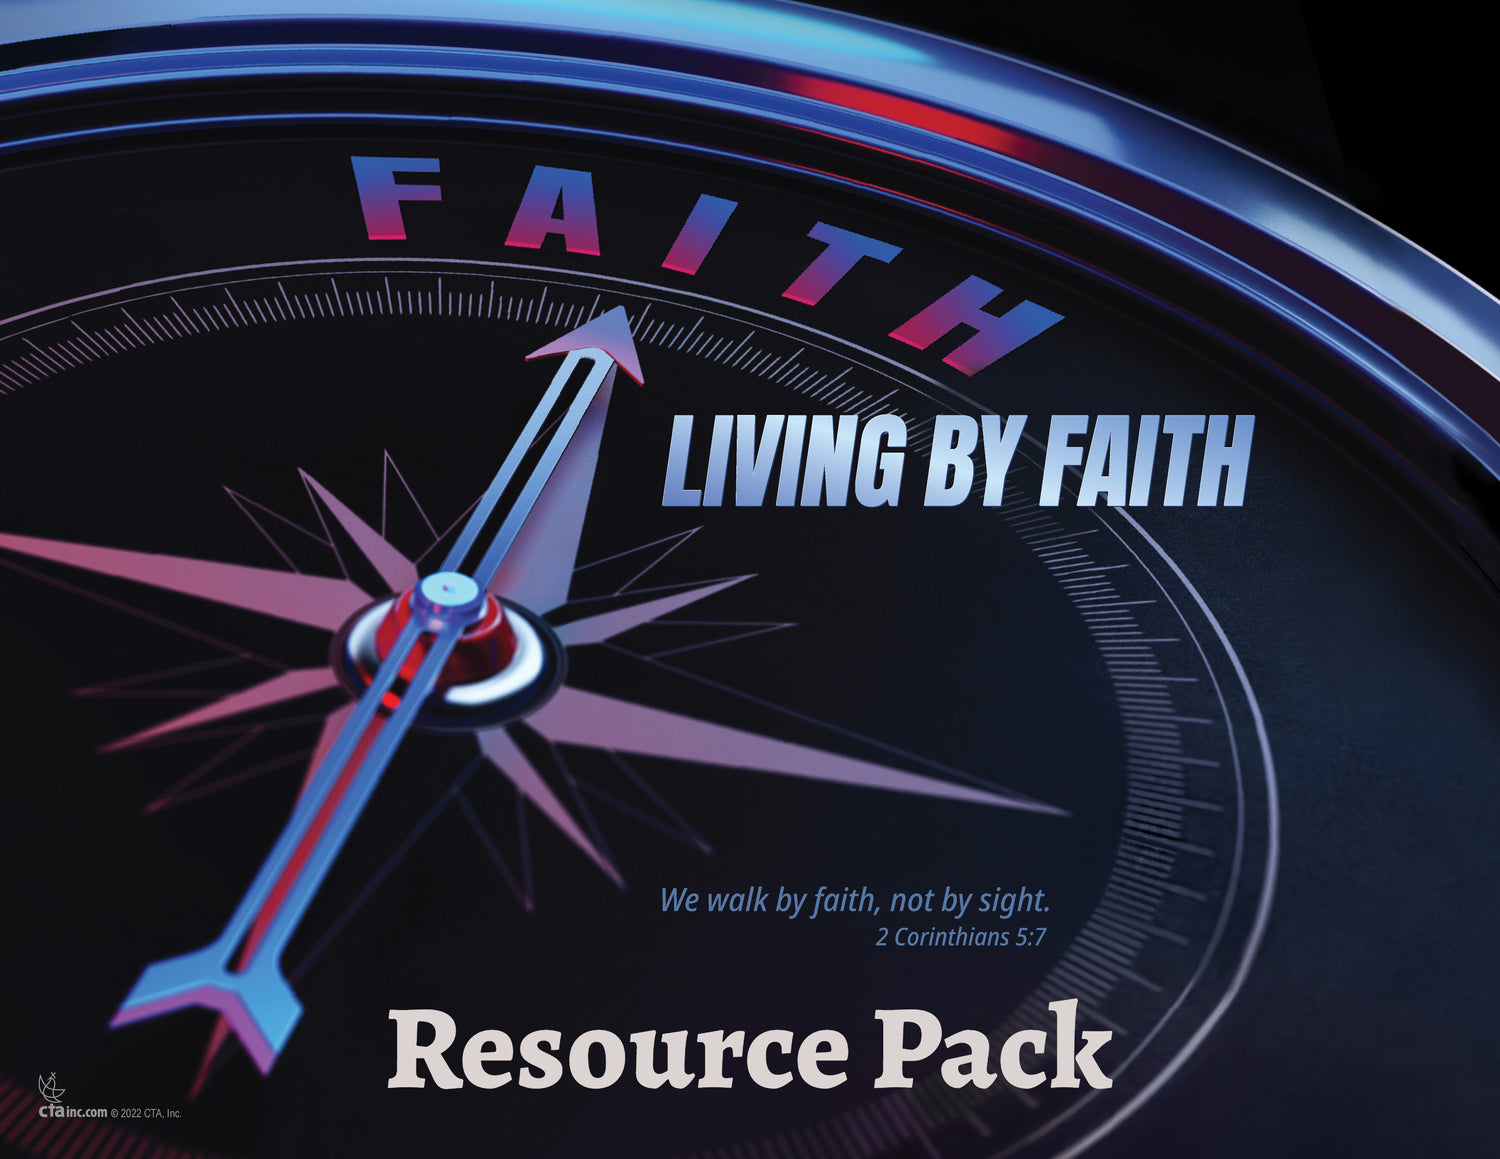 Resource Pack - Living by Faith